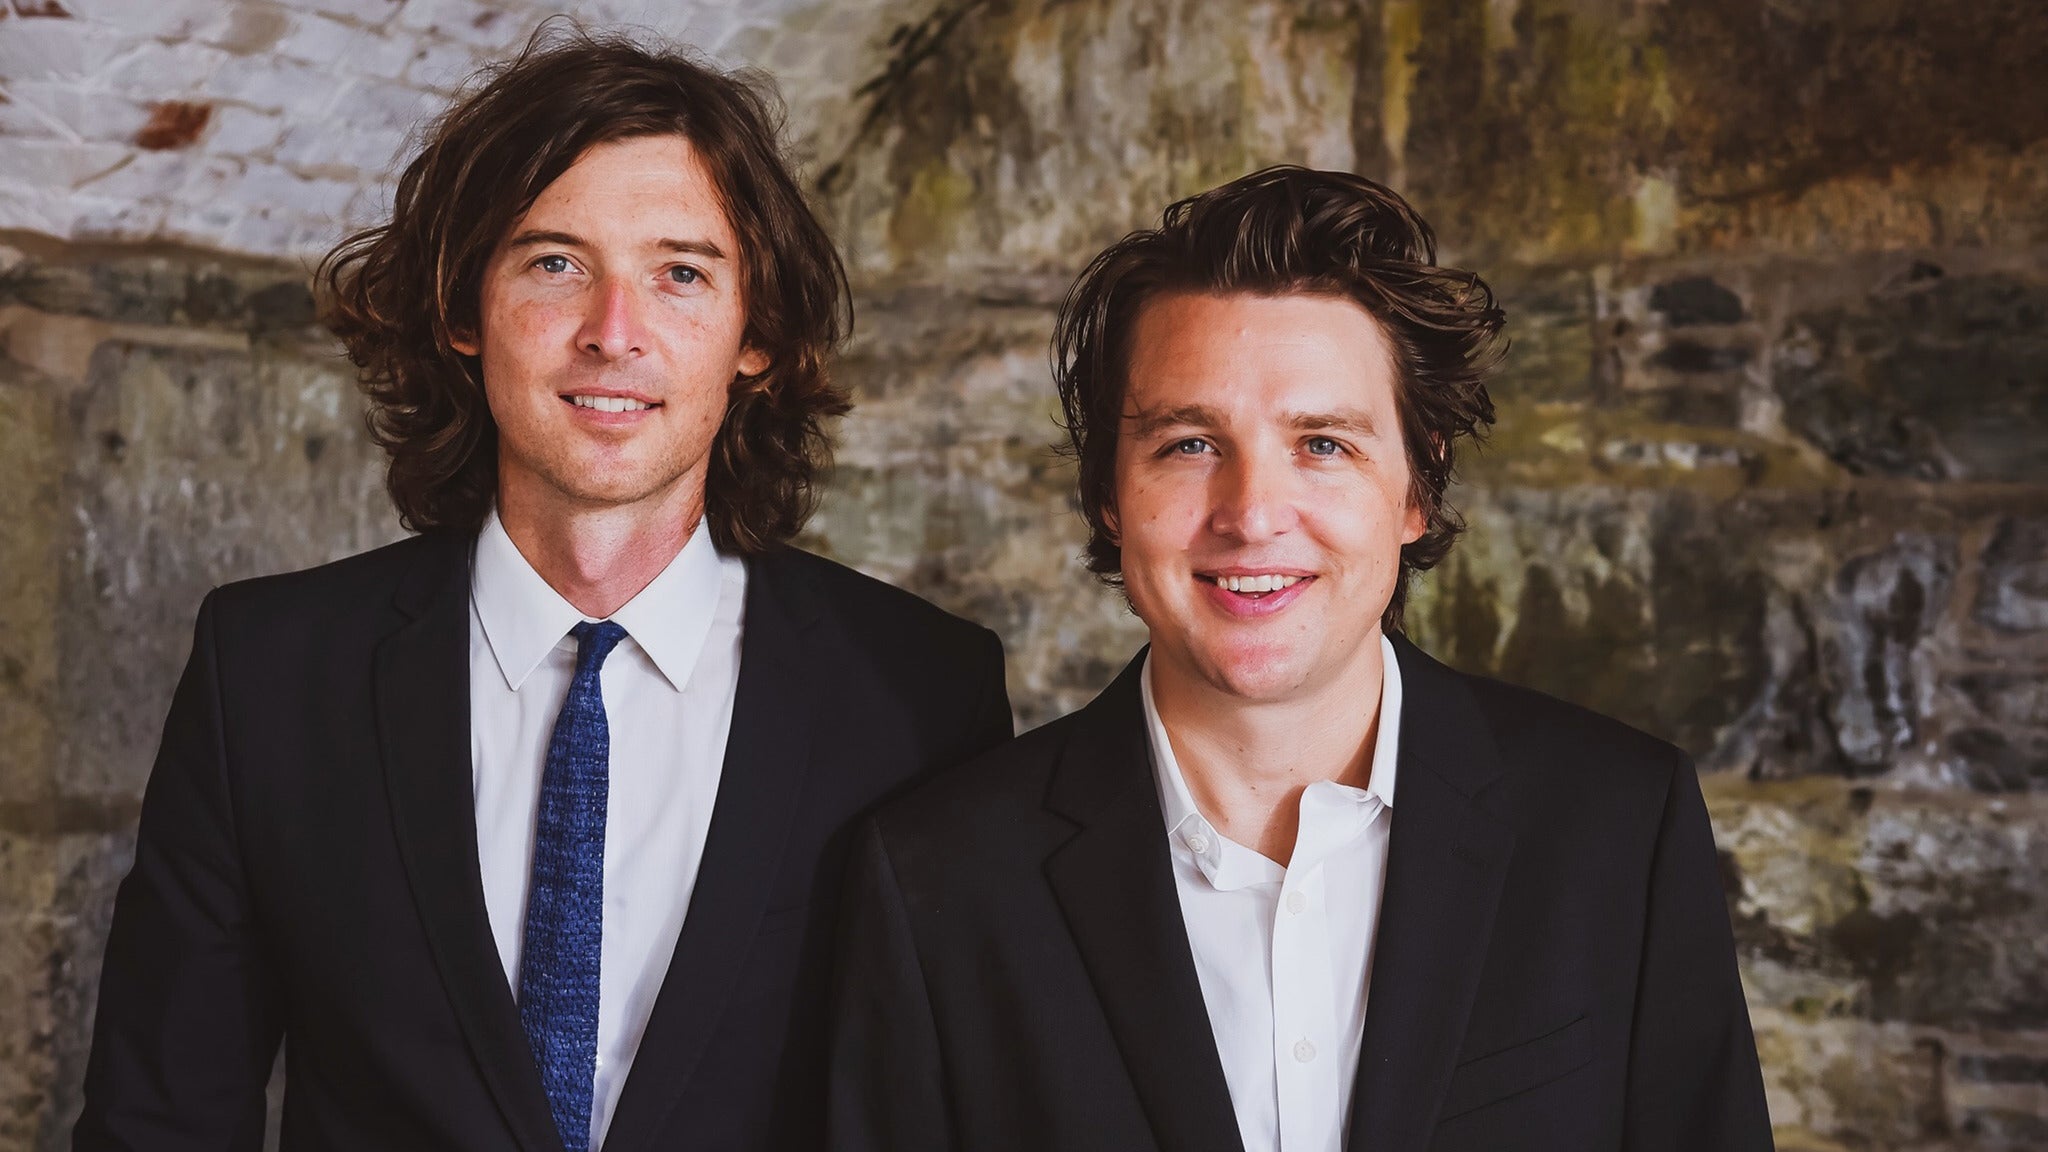 The Milk Carton Kids in Minneapolis promo photo for VIP Package Onsale presale offer code